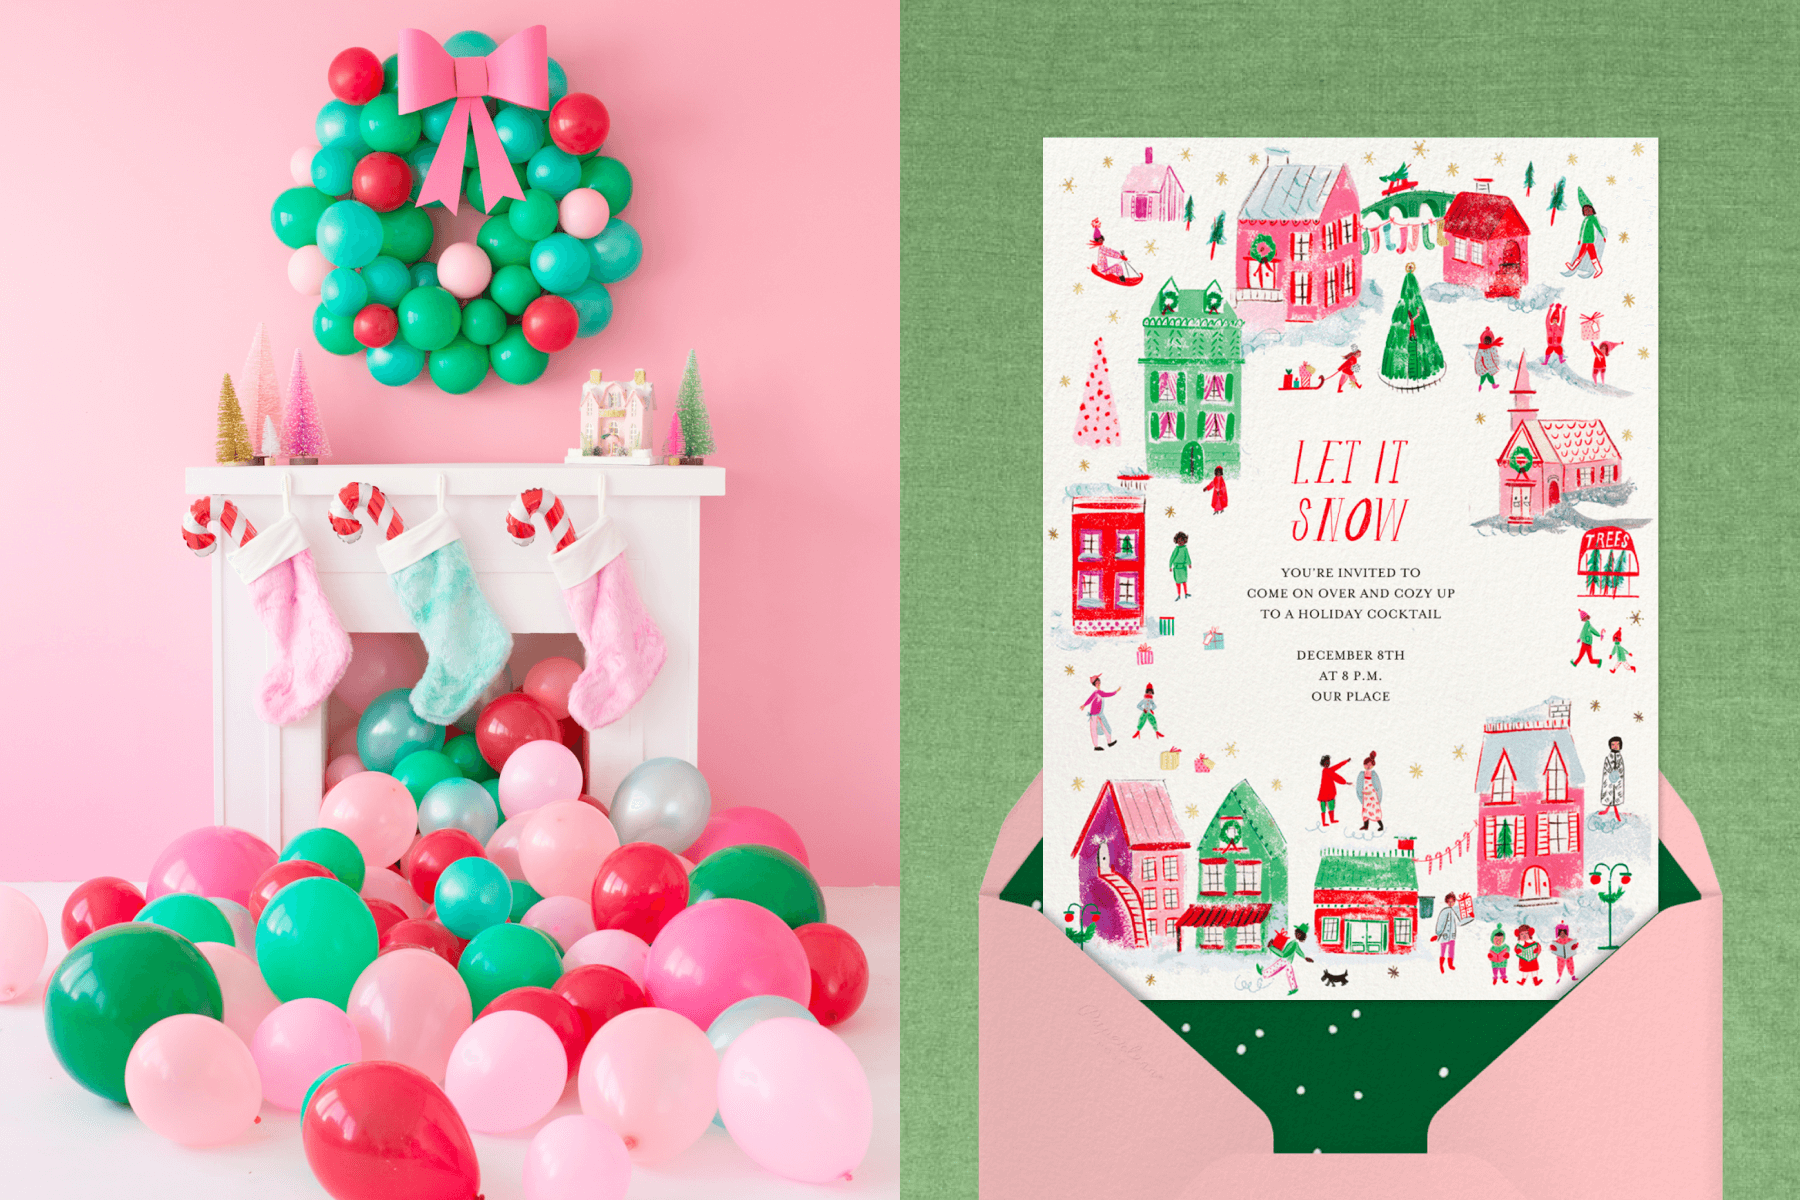 left: A pink room with a white fireplace hung with pastel stockings with green, pink, and red balloons on the floor and a green balloon wreath on the wall. Right: A holiday party invitation with a border of an illustrated village with red and green buildings and little townspeople engaging in winter activities.